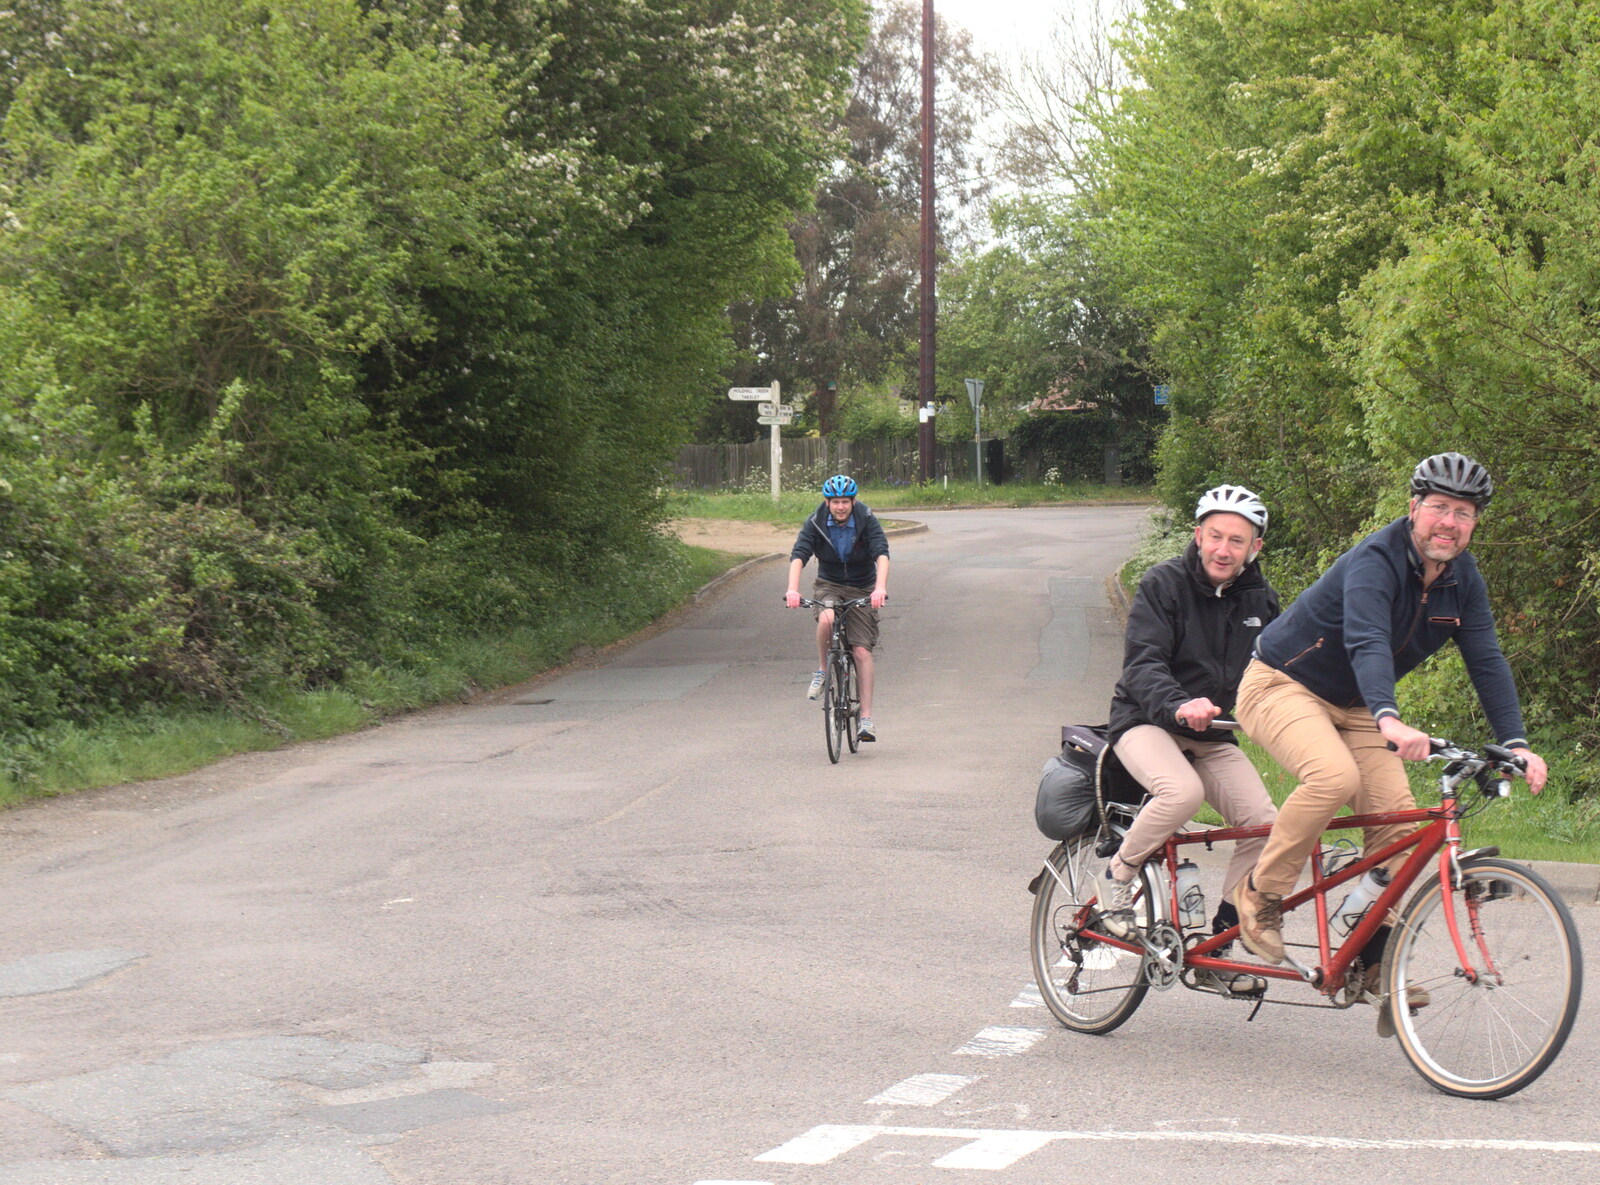 The Boy Phil and the Tandem rock up from The Last-Ever BSCC Weekend Away Bike Ride, Thaxted, Essex - 6th May 2017